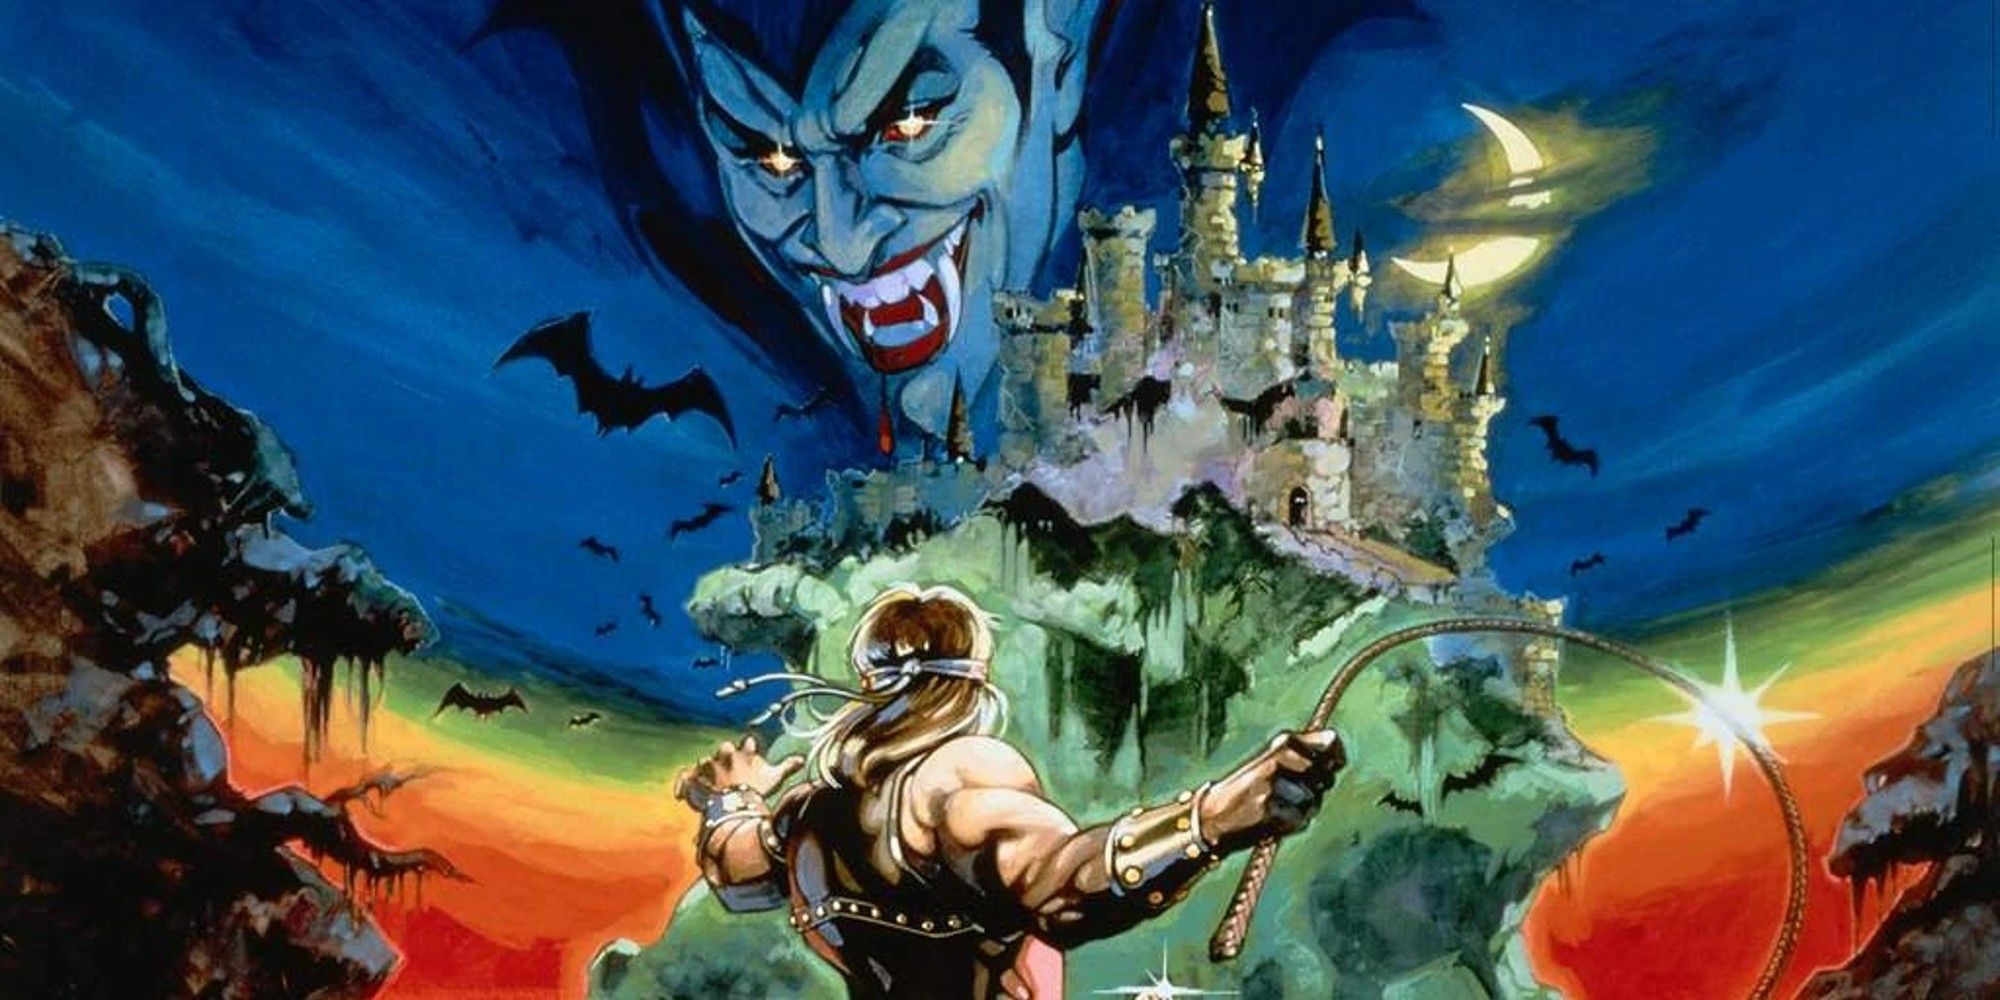 Castlevania Cover Art with Draculas face and casle in the night sky